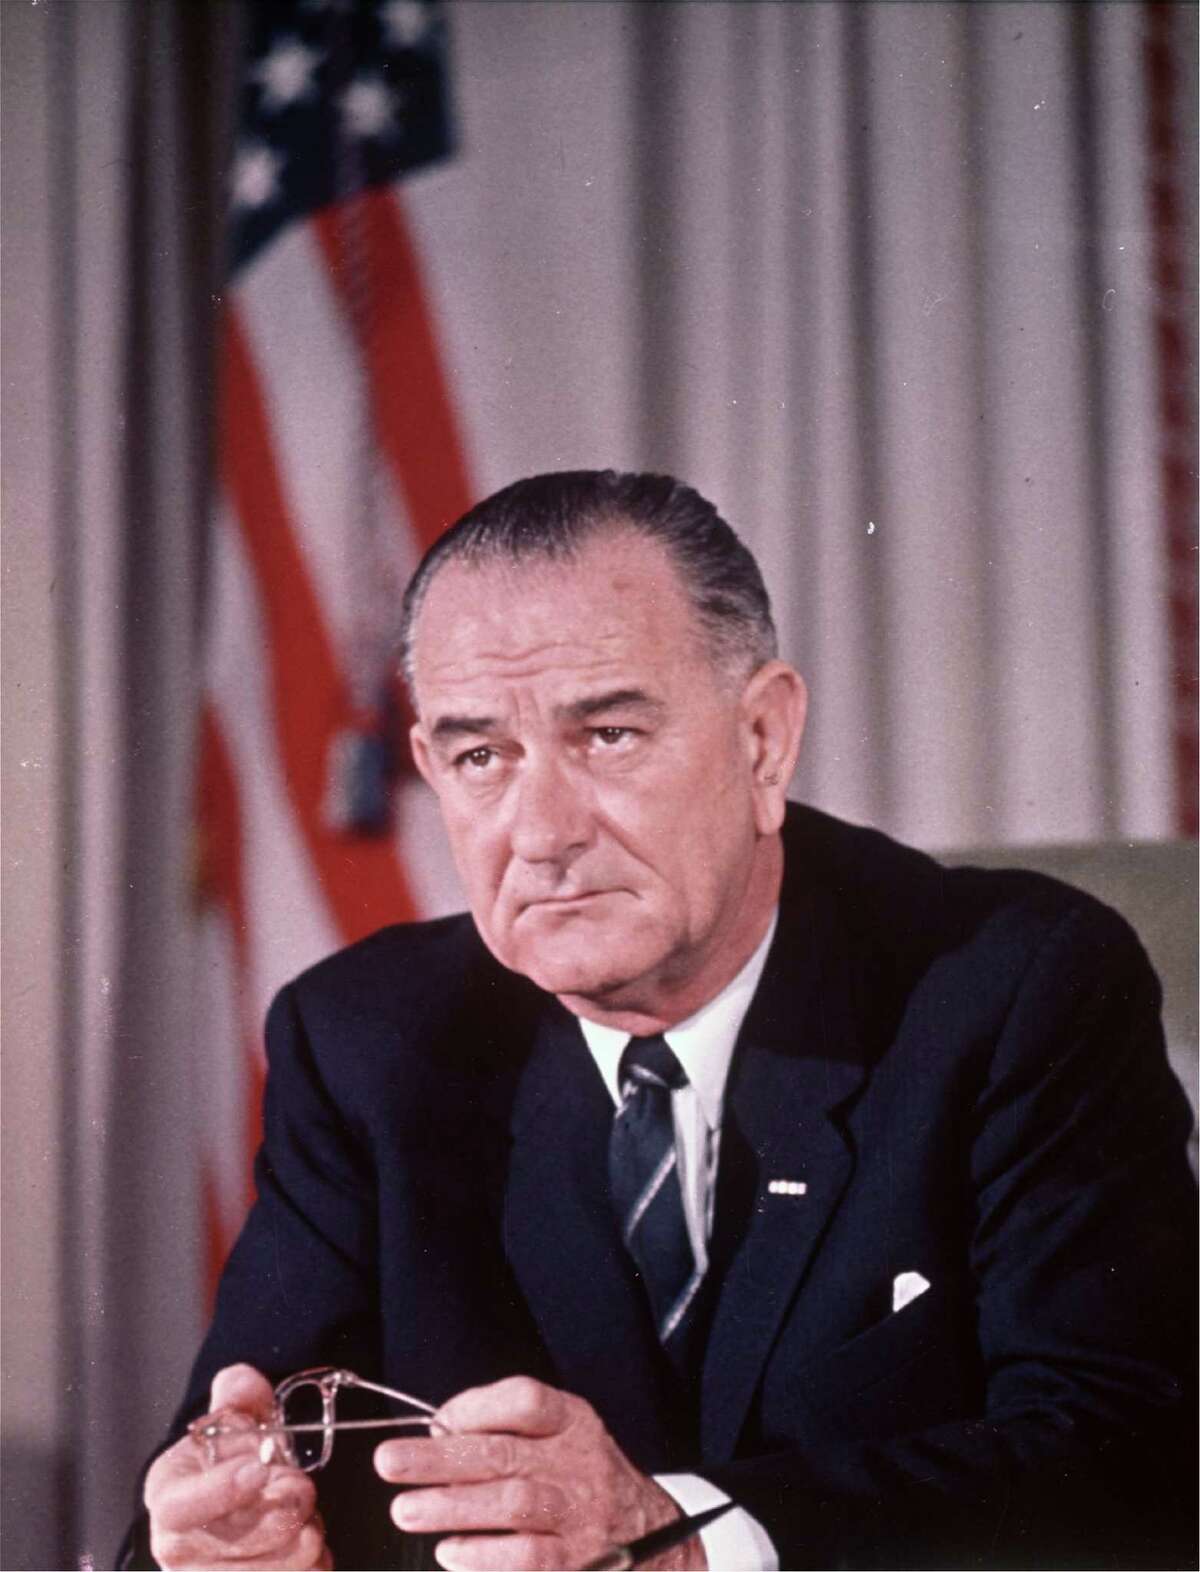 Lyndon B. Johnson was the 36th President of the United States from 1963-1969. He was born in Stonewall, Texas.